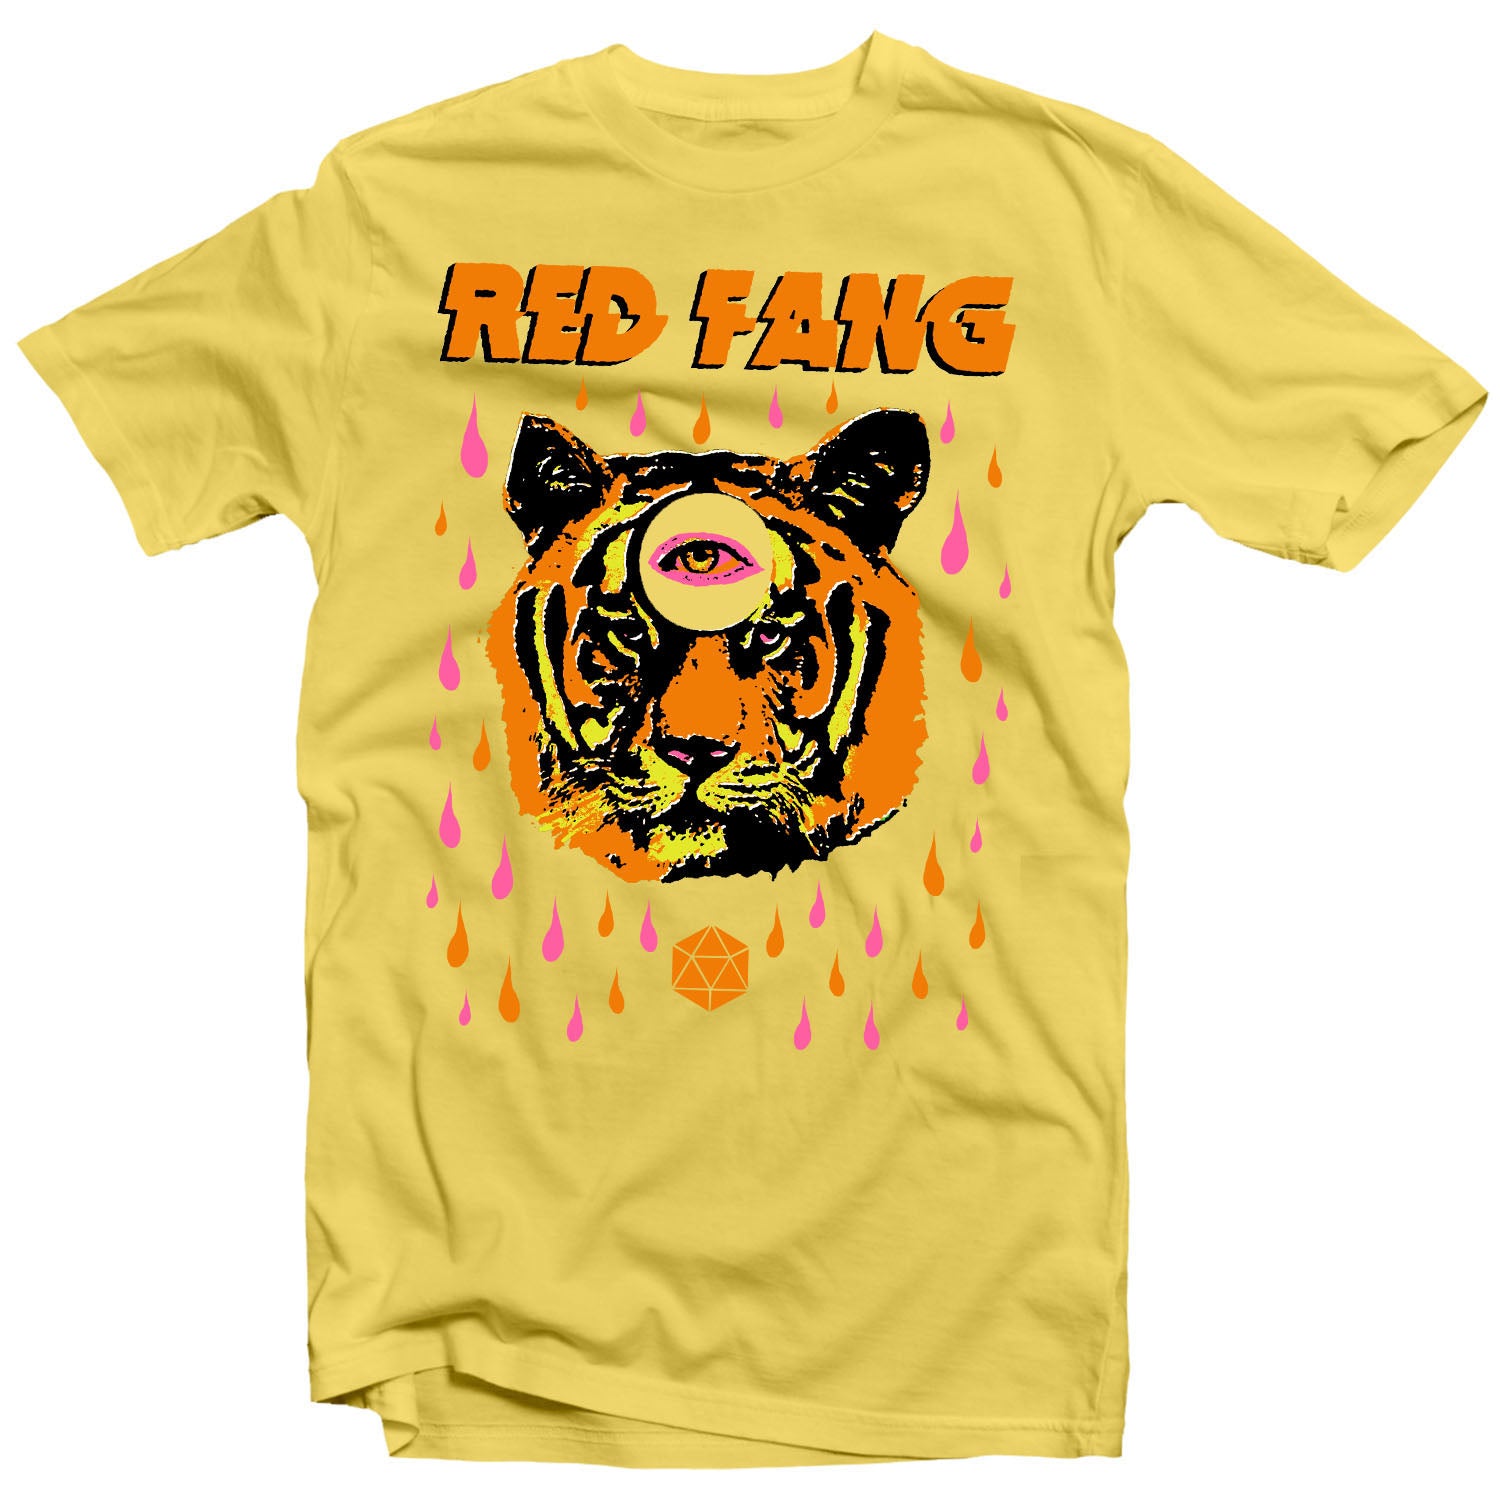 Red Fang "Psychic Tiger" T-Shirt